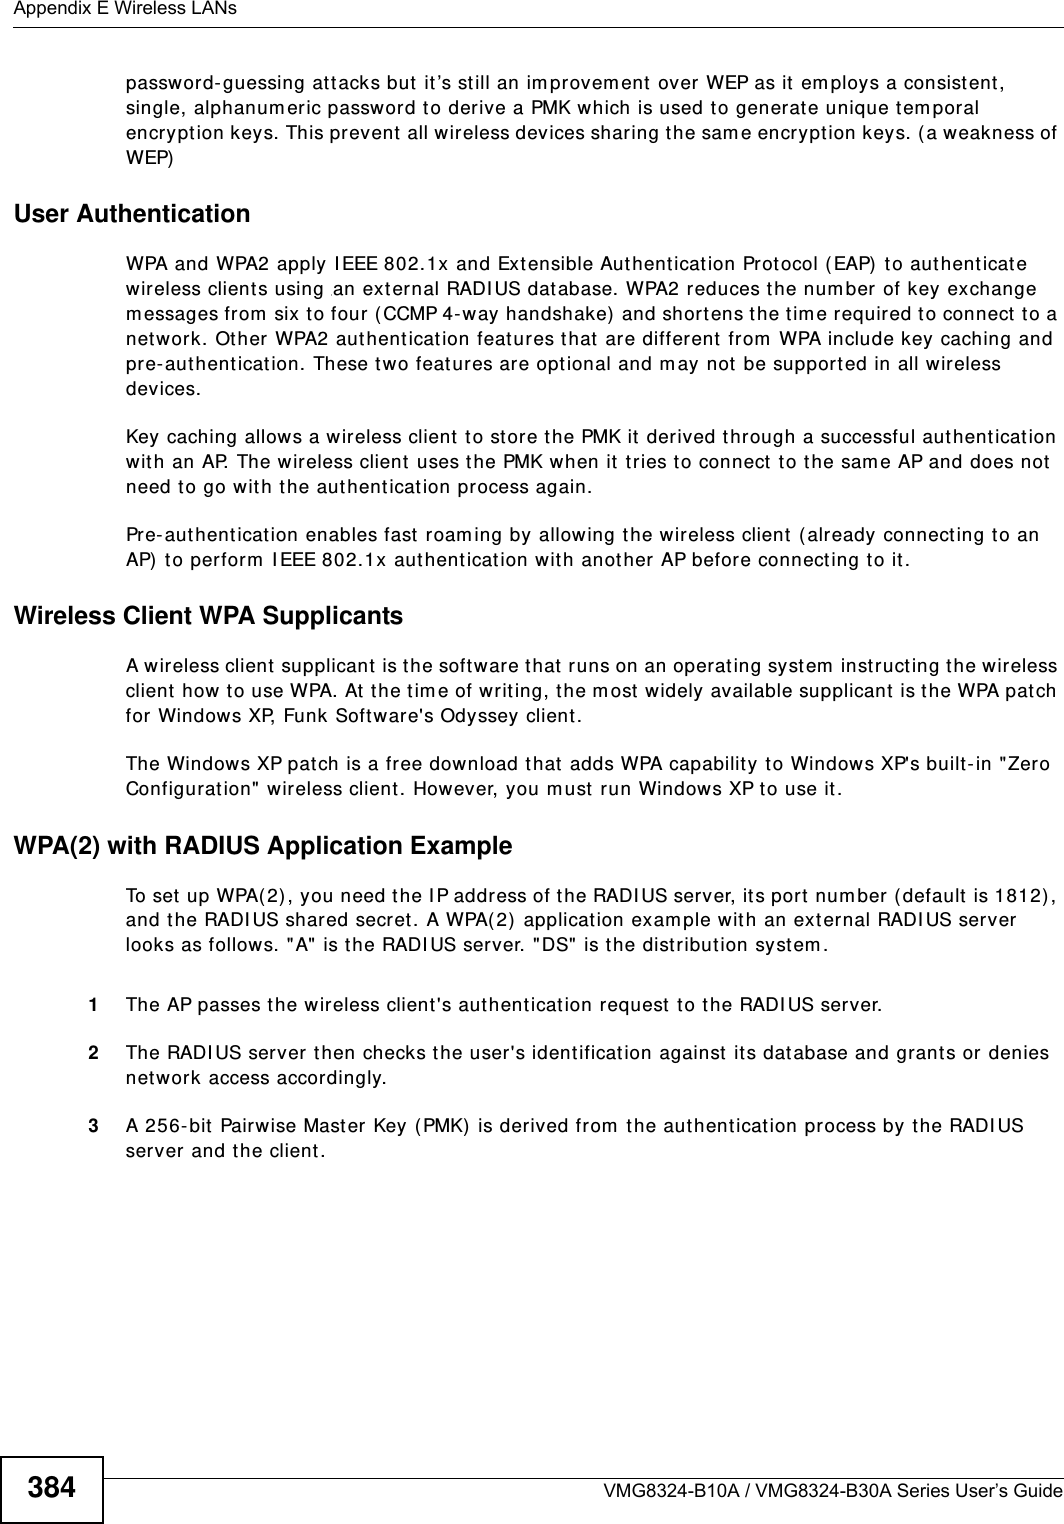 Appendix E Wireless LANsVMG8324-B10A / VMG8324-B30A Series User’s Guide384passwor d- guessing at tacks but  it ’s st ill an im provem ent over WEP as it em ploys a consistent, single, alphanumeric password to derive a PMK which is used t o generate unique tem poral encrypt ion keys. This prevent all wireless devices shar ing t he sam e encrypt ion keys. ( a weakness of WEP)User Authentication WPA and WPA2 apply I EEE 802.1x and Ext ensible Aut henticat ion Prot ocol ( EAP)  t o aut henticate wireless clients using  an ext ernal RADI US dat abase. WPA2 reduces t he num ber of key exchange m essages from  six to four (CCMP 4- way handshake)  and short ens the t im e required t o connect to a net work. Other WPA2 authent icat ion feat ures t hat  are different from  WPA include key caching and pre- aut hentication. These two feat ures are opt ional and m ay not  be supported in all wir eless devices.Key caching allows a wireless client t o store the PMK it derived through a successful authent icat ion wit h an AP. The w ireless client  uses t he PMK when it tries t o connect to the sam e AP and does not need t o go with t he authent icat ion process again.Pre- aut henticat ion enables fast  roam ing by allowing the wireless client  ( already connect ing t o an AP)  to perform  I EEE 802.1x authent icat ion wit h anot her AP befor e connecting t o it .Wireless Client WPA SupplicantsA wireless client supplicant  is the soft ware t hat  runs on an operat ing syst em  instruct ing t he wireless client  how t o use WPA. At the tim e of writ ing, the most widely available supplicant  is t he WPA patch for Windows XP, Funk Software&apos;s Odyssey client. The Windows XP patch is a free download that  adds WPA capabilit y t o Windows XP&apos;s built-in &quot;Zero Configurat ion&quot; wireless client . However, you m ust run Windows XP to use it . WPA(2) with RADIUS Application ExampleTo set  up WPA( 2), you need t he I P address of t he RADI US server, its port num ber ( default is 1812), and the RADI US shared secret . A WPA( 2)  application example with an ext ernal RADI US server looks as follows. &quot; A&quot; is the RADI US server. &quot;DS&quot;  is t he distribution syst em .1The AP passes the wireless client &apos;s aut hentication request  t o t he RADI US server.2The RADI US server t hen checks the user&apos;s identificat ion against it s dat abase and grant s or denies net work access accordingly.3A 256- bit  Pairwise Mast er Key (PMK) is derived from  t he aut hentication process by t he RADI US server and t he client .